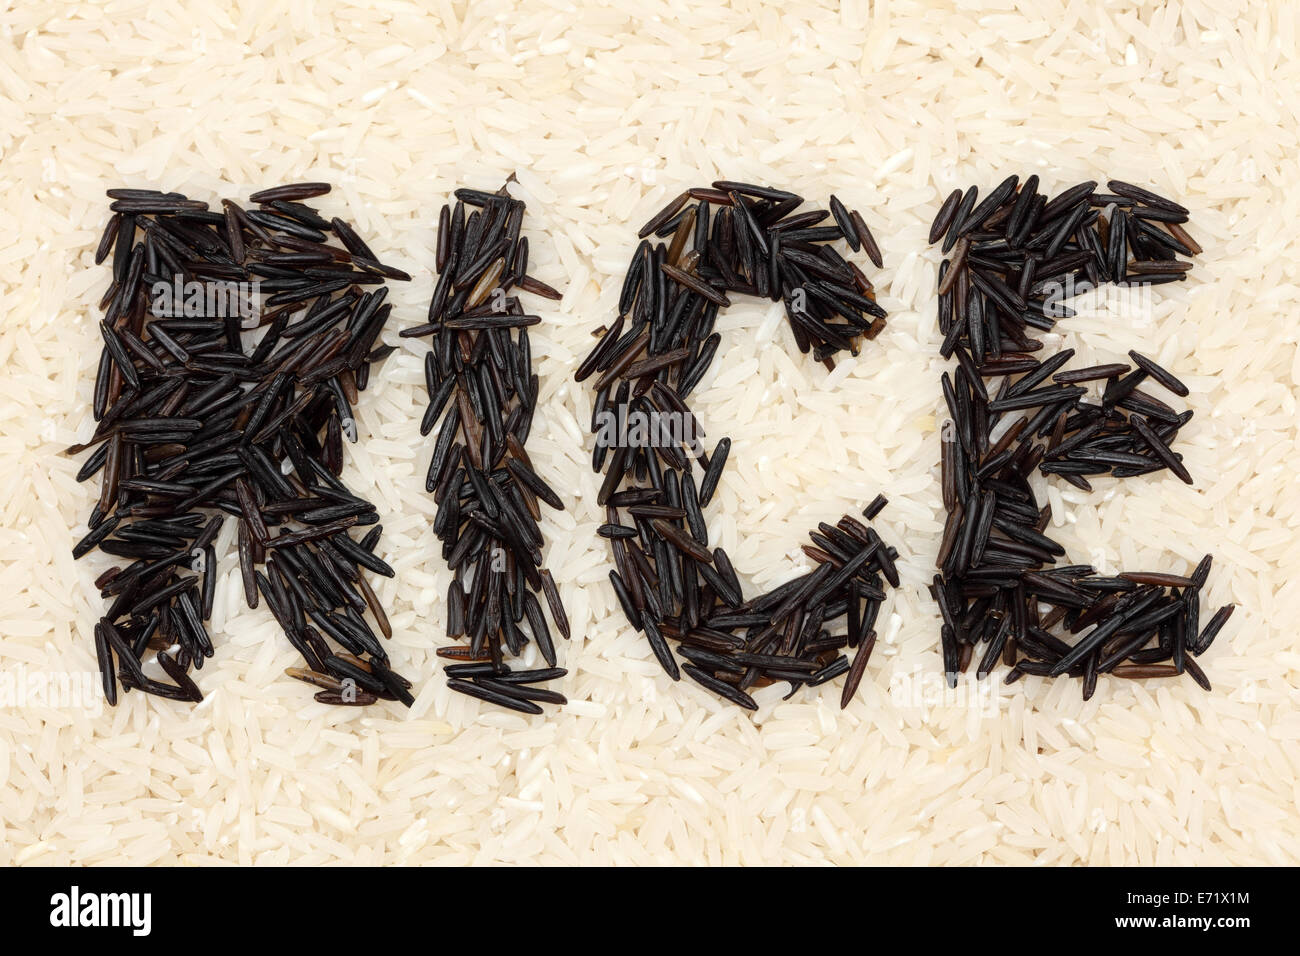 Word "RICE" written with wild rice on a white rice background. Closeup. Stock Photo